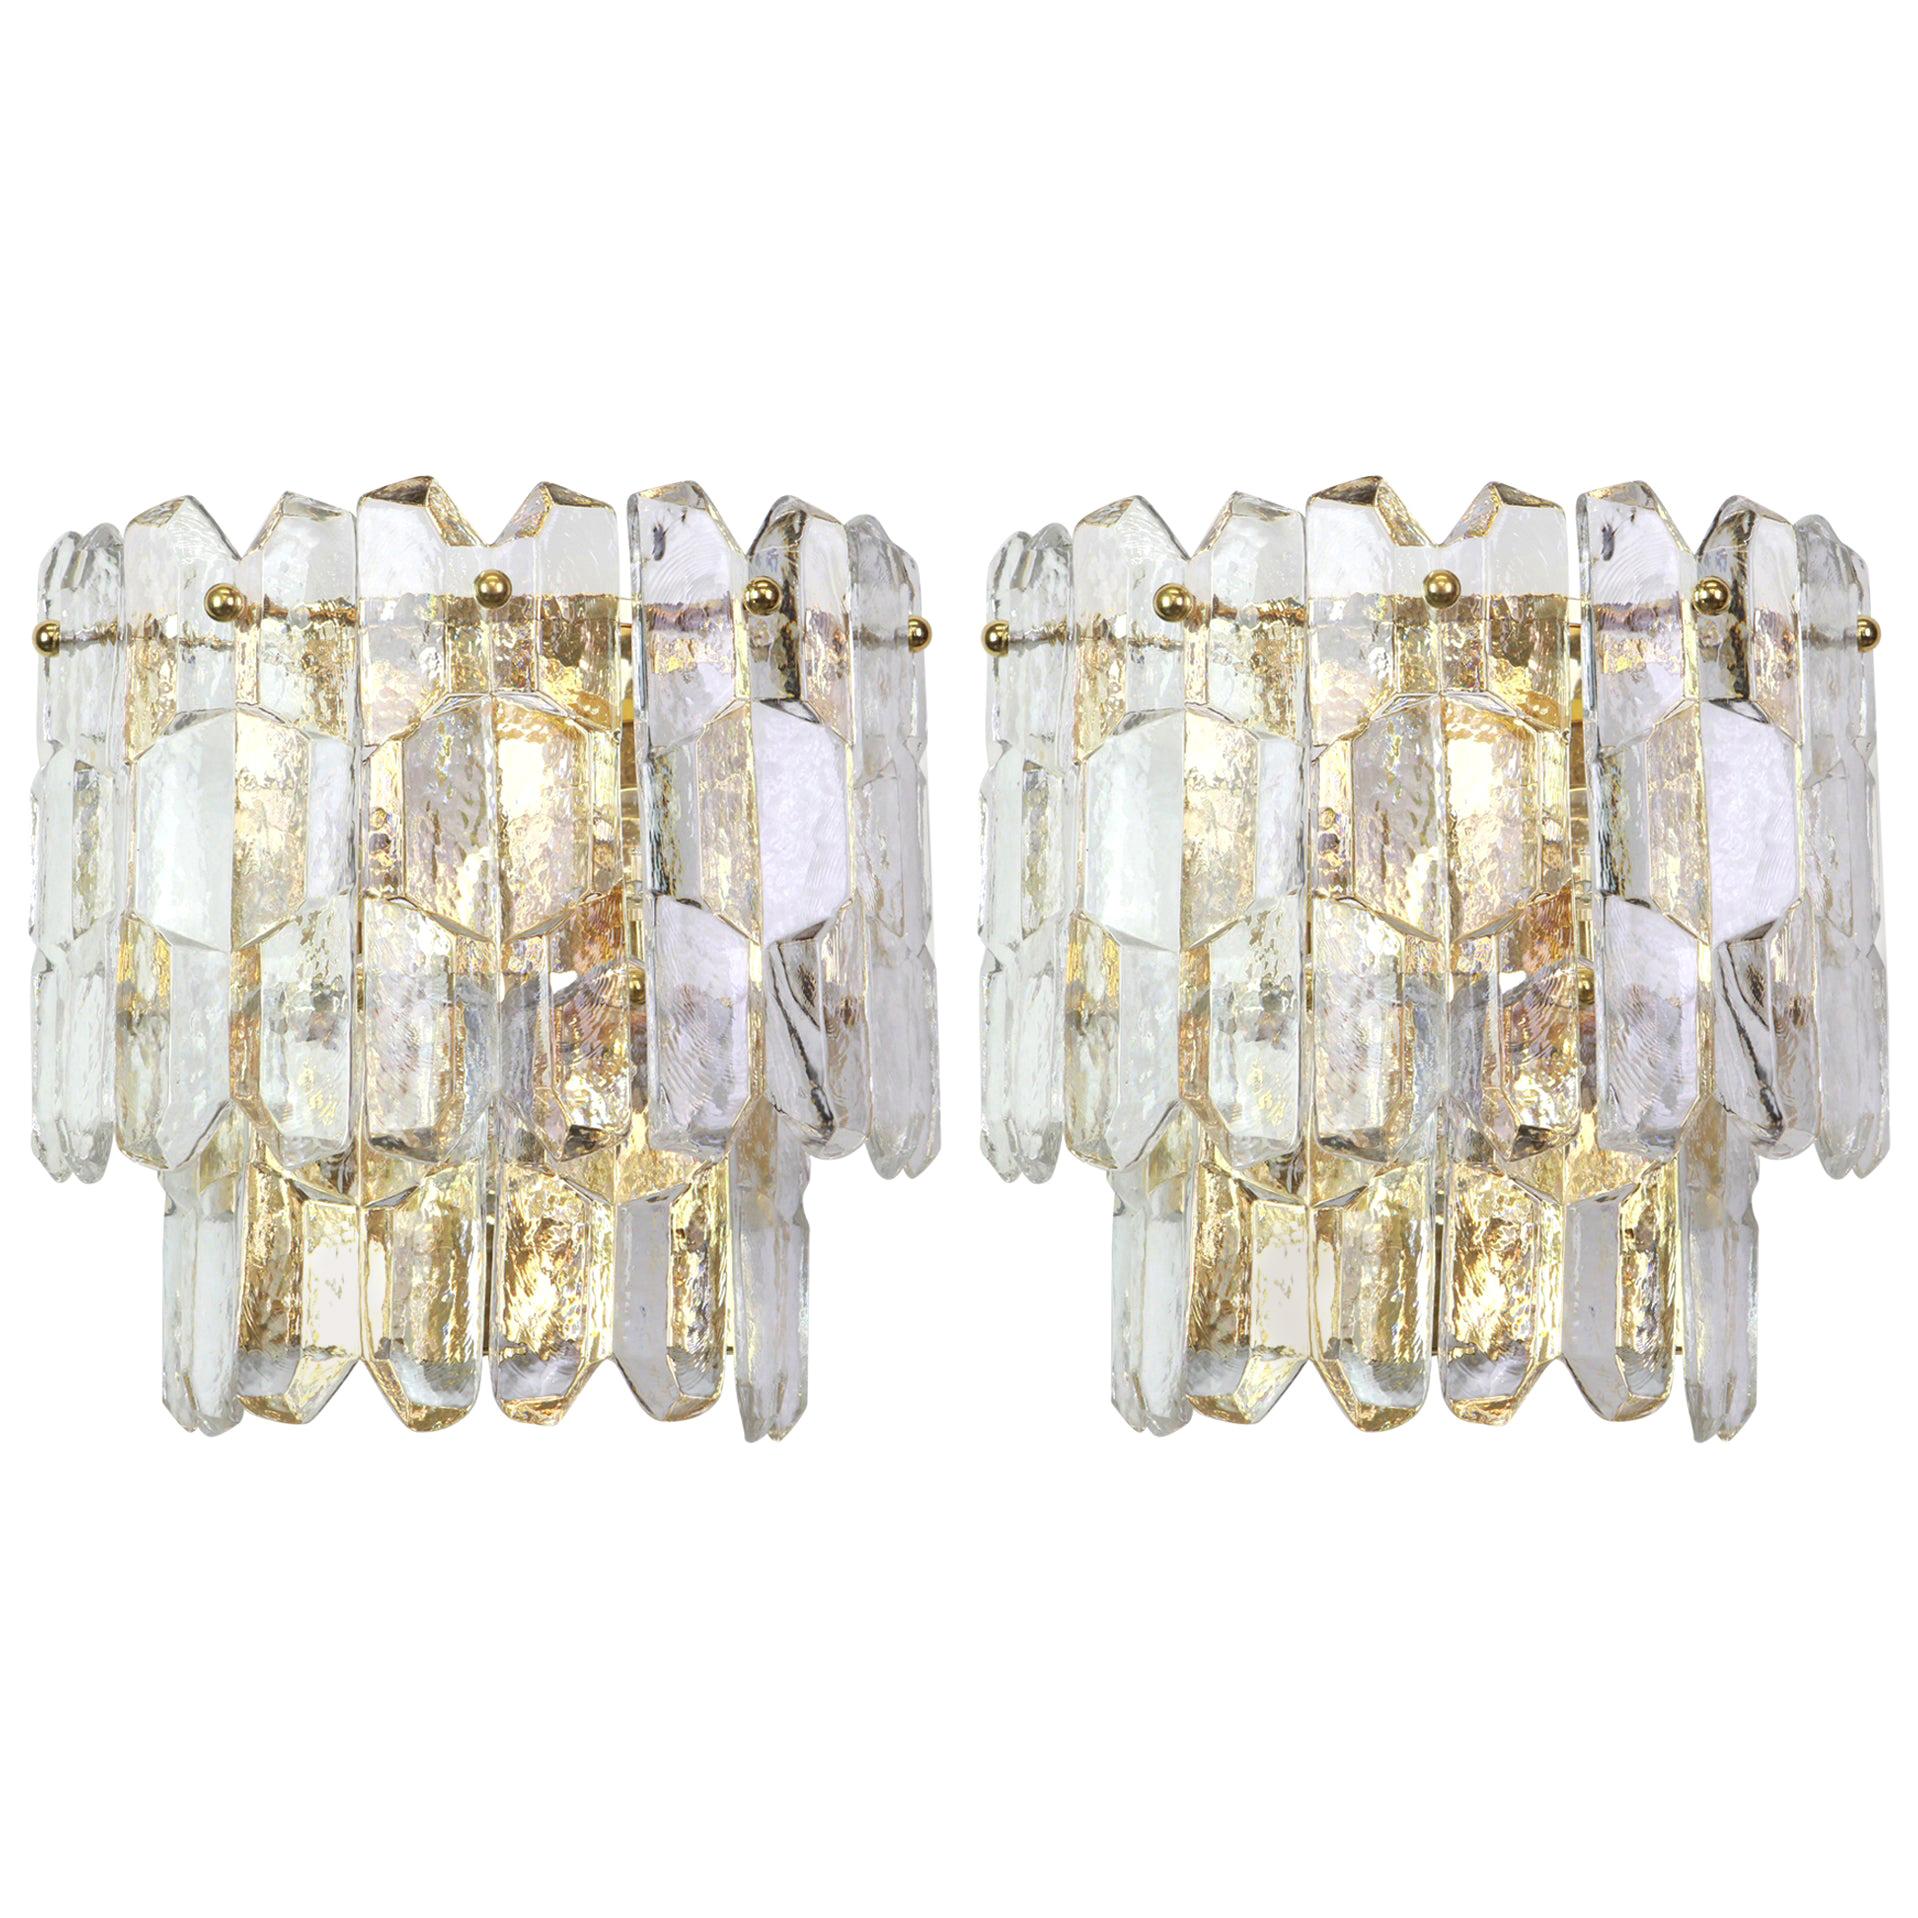 Mid-Century Modern Pair of Large Kalmar Sconces Wall Lights 'Palazzo', Austria, 1960s For Sale